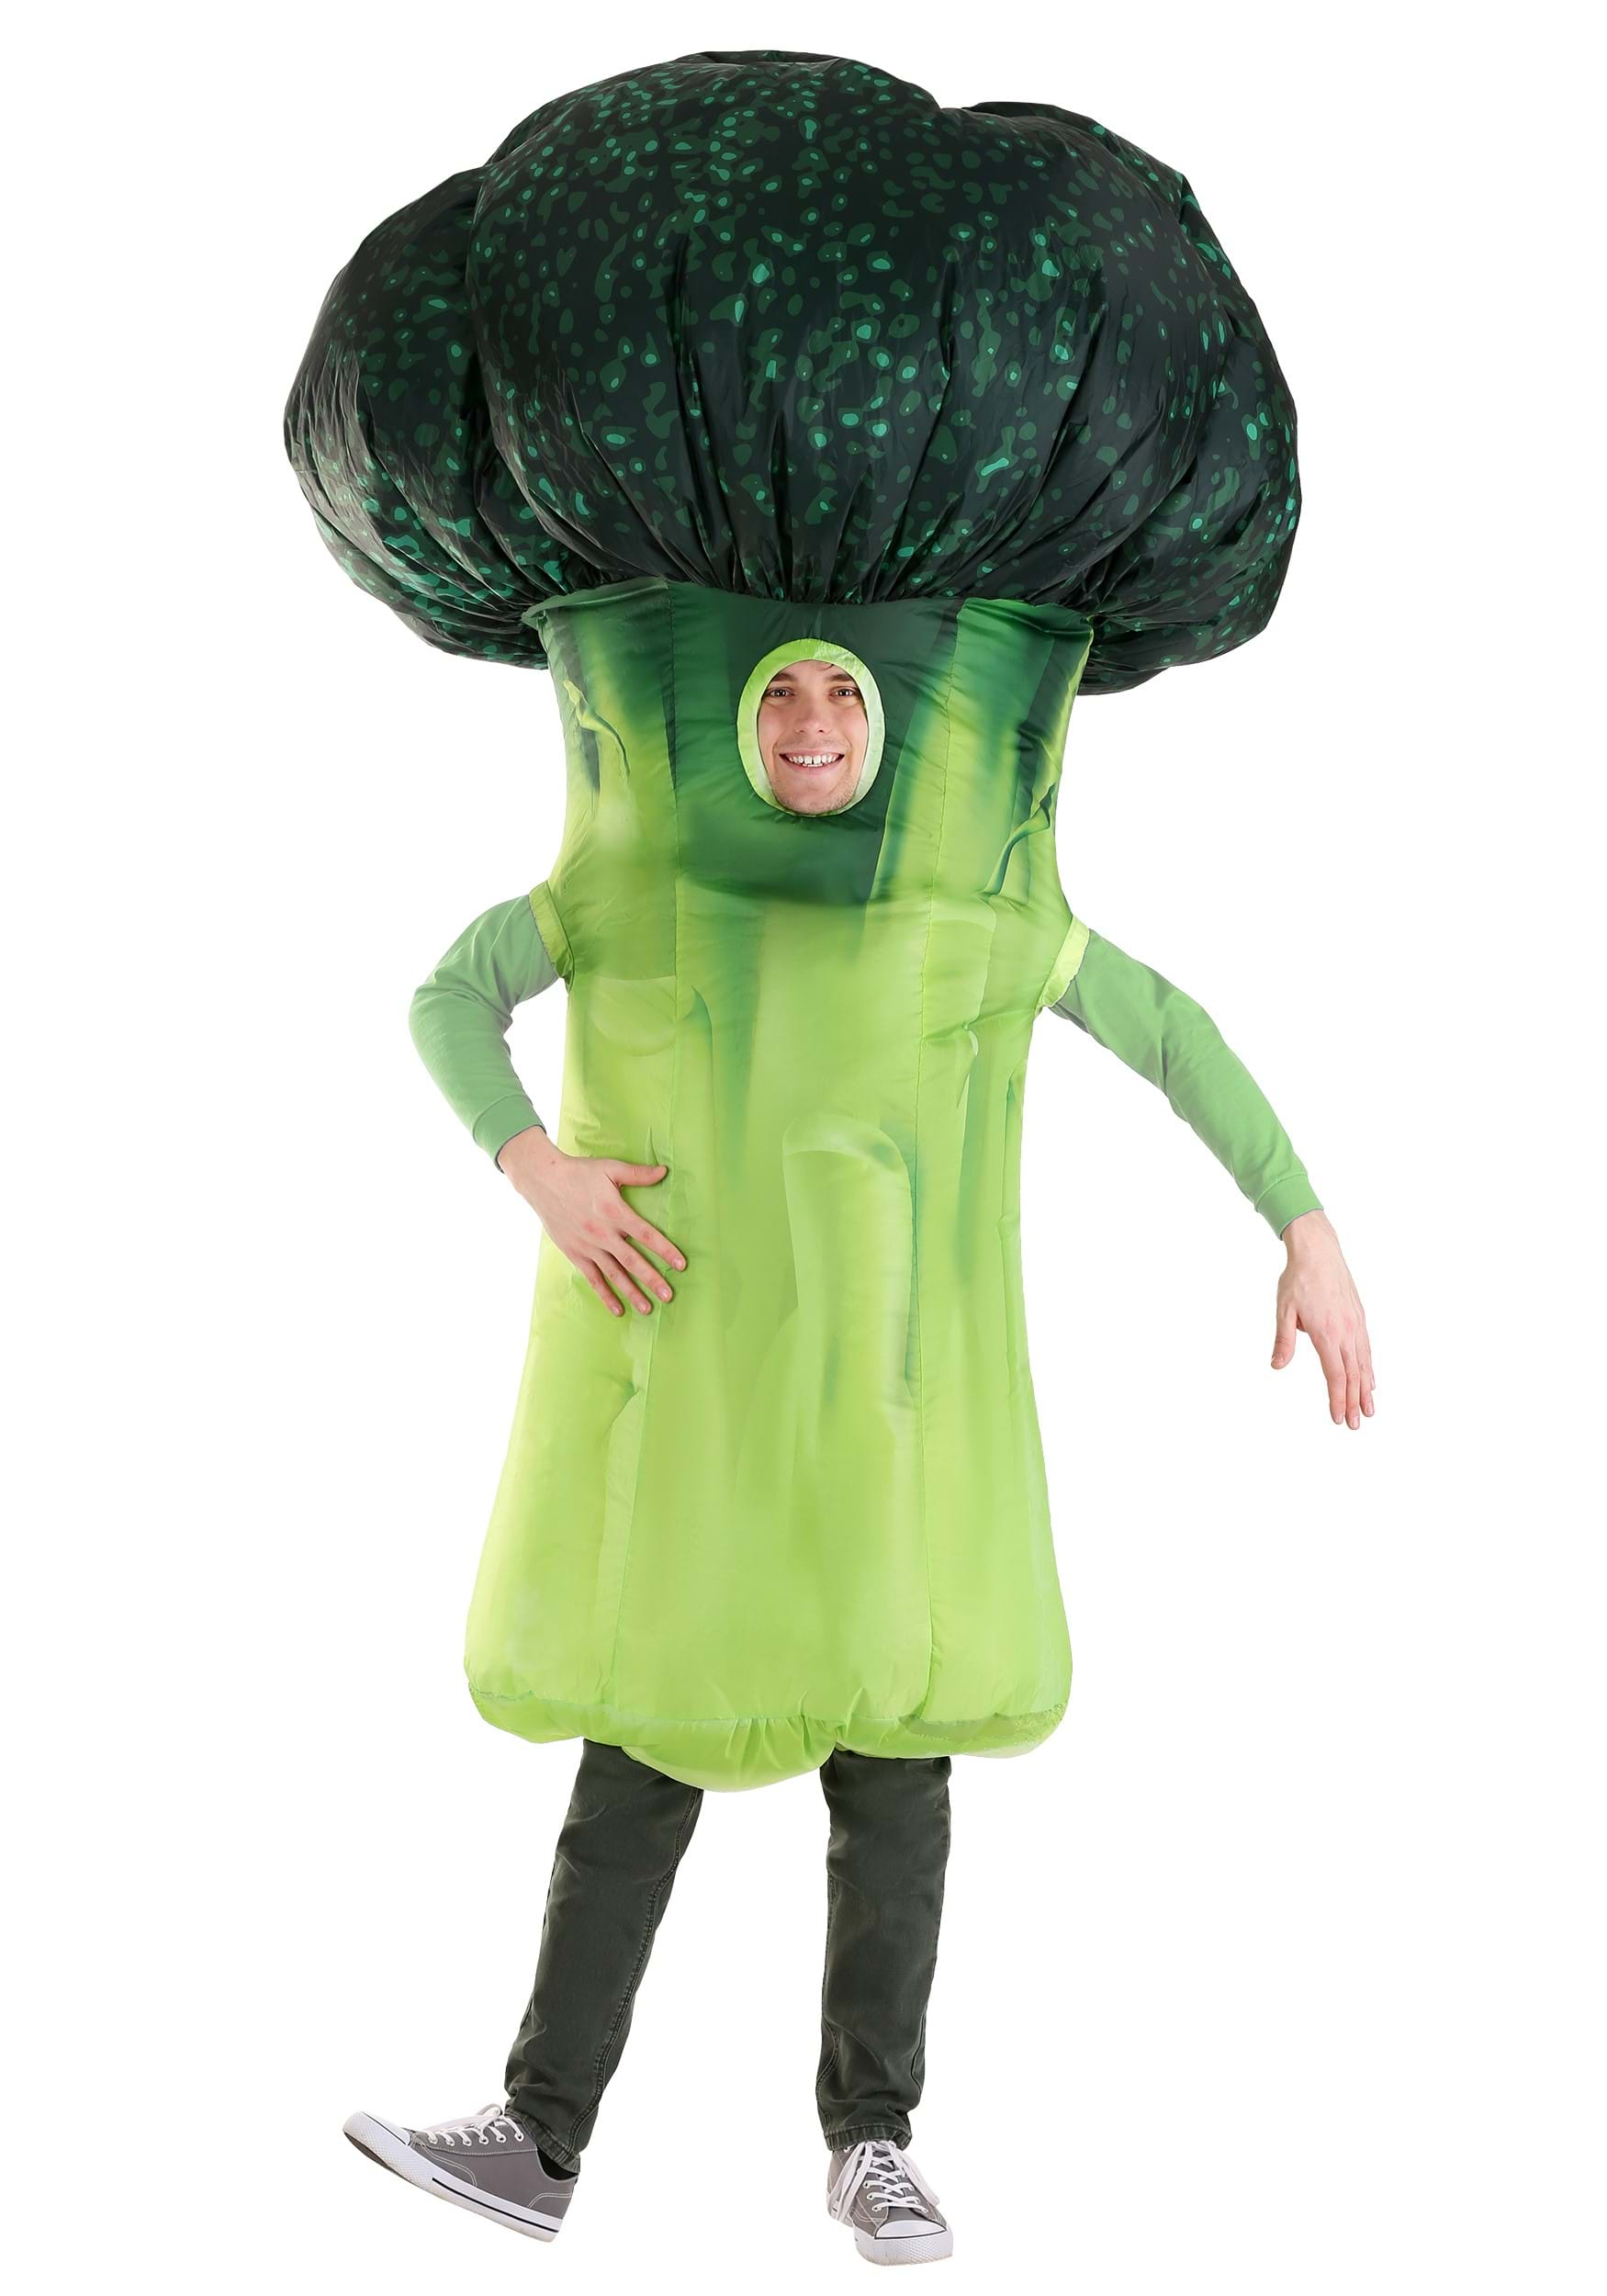 Adult Inflatable Scrumptious Broccoli Costume